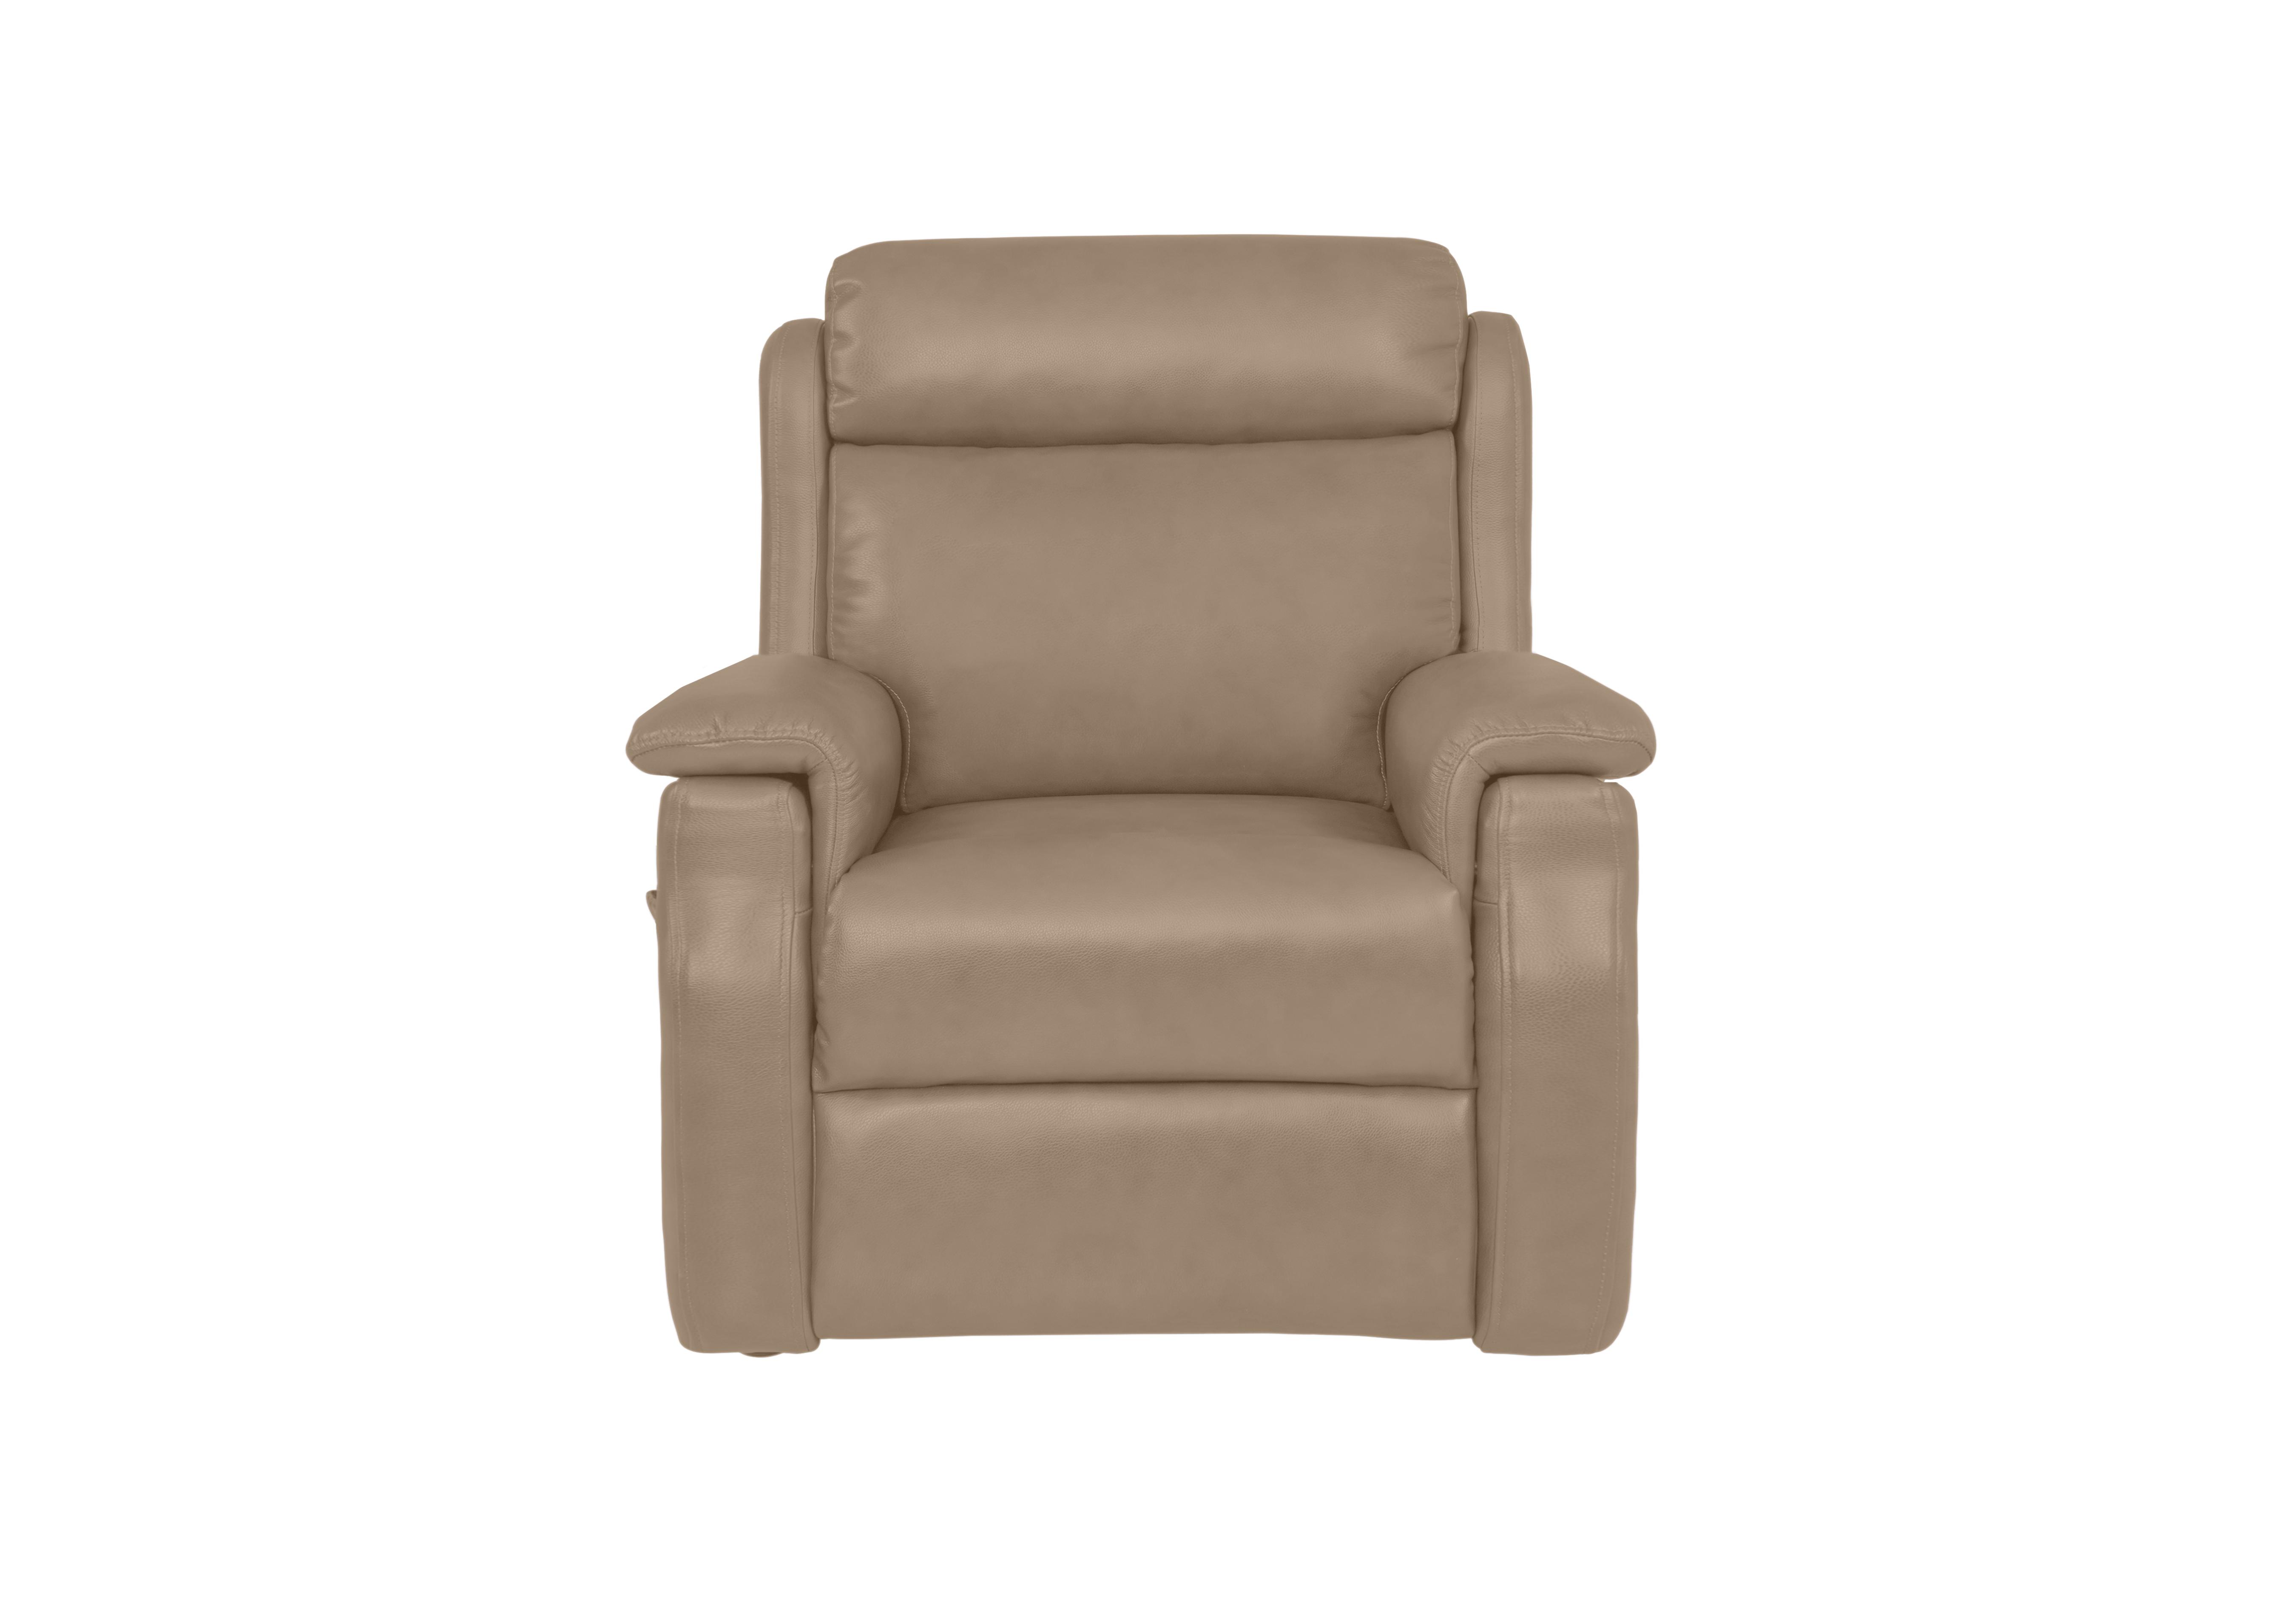 My Chair Kirk Leather Lift and Rise Chair in Cat-60/06 Montana Barley on Furniture Village